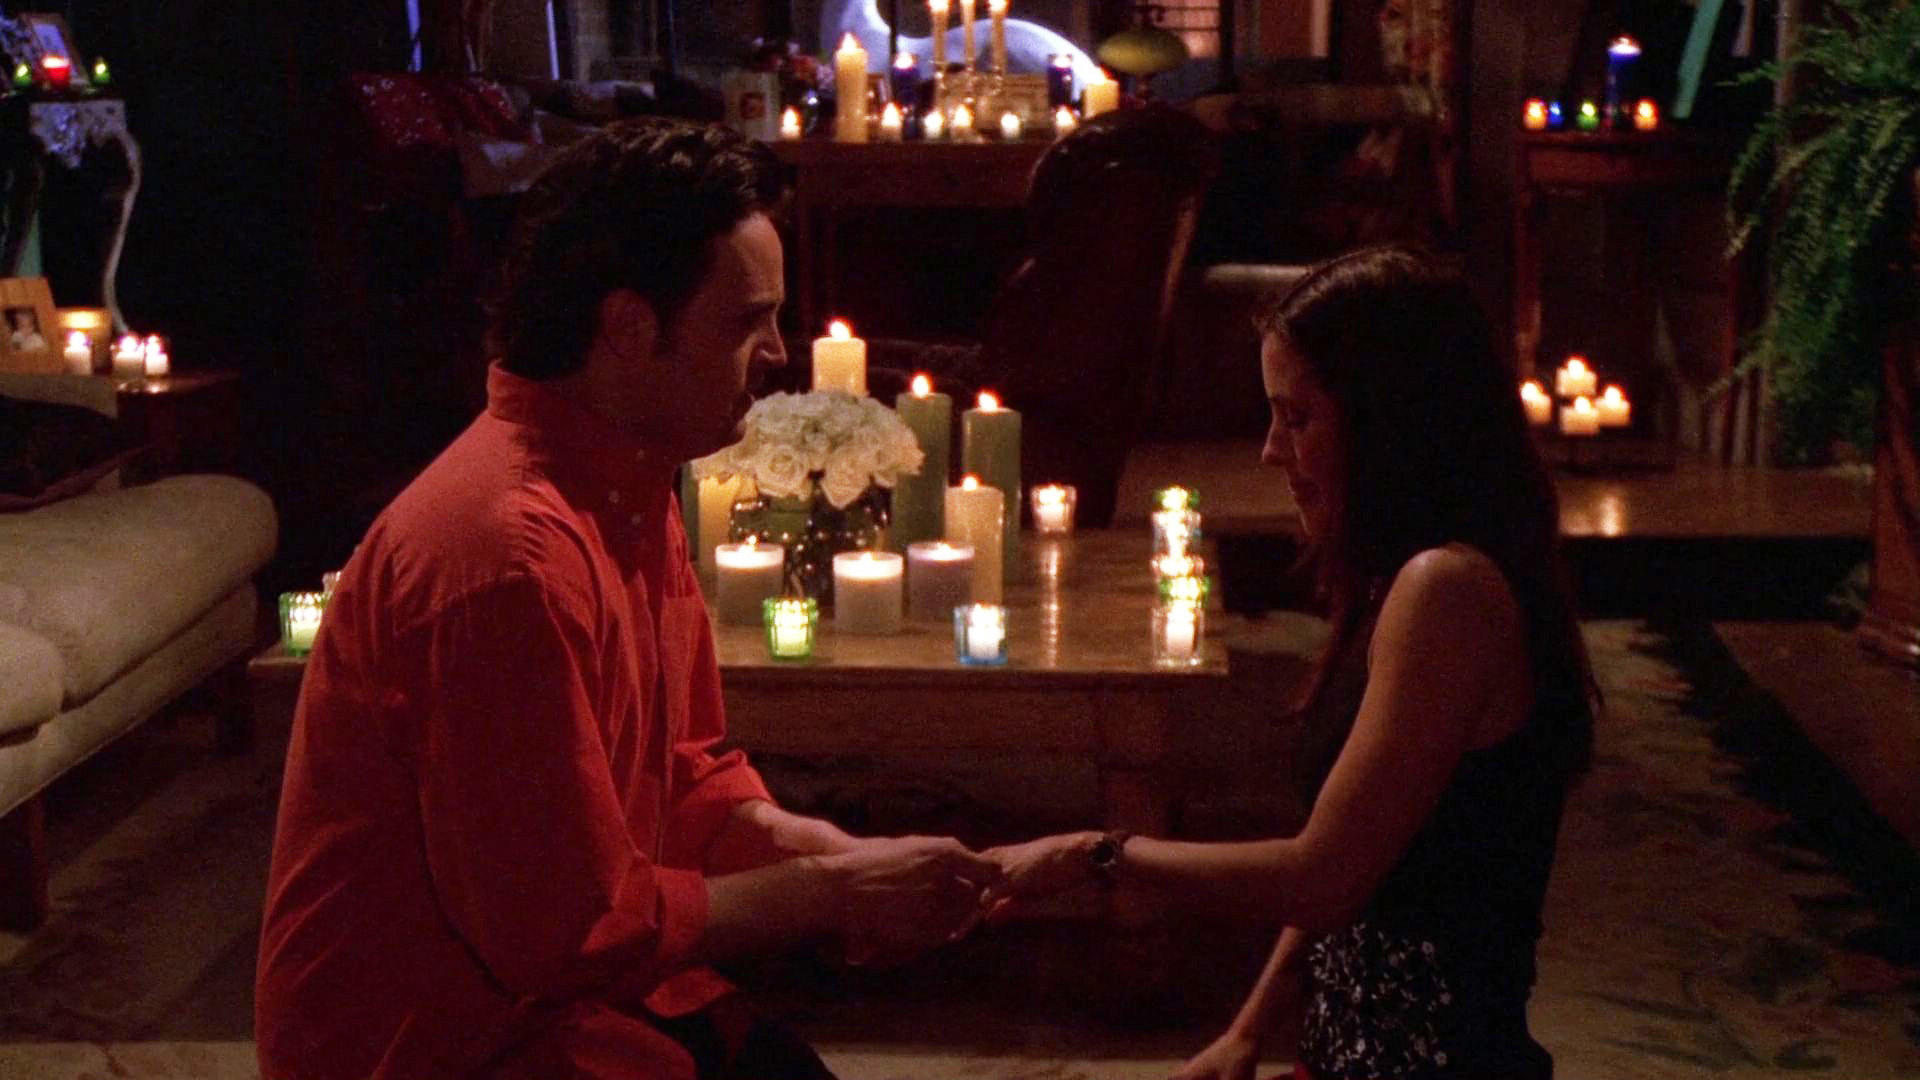 Friends (S06E25): The One With The Proposal (2) Summary - Season 6 Episode 25 Guide